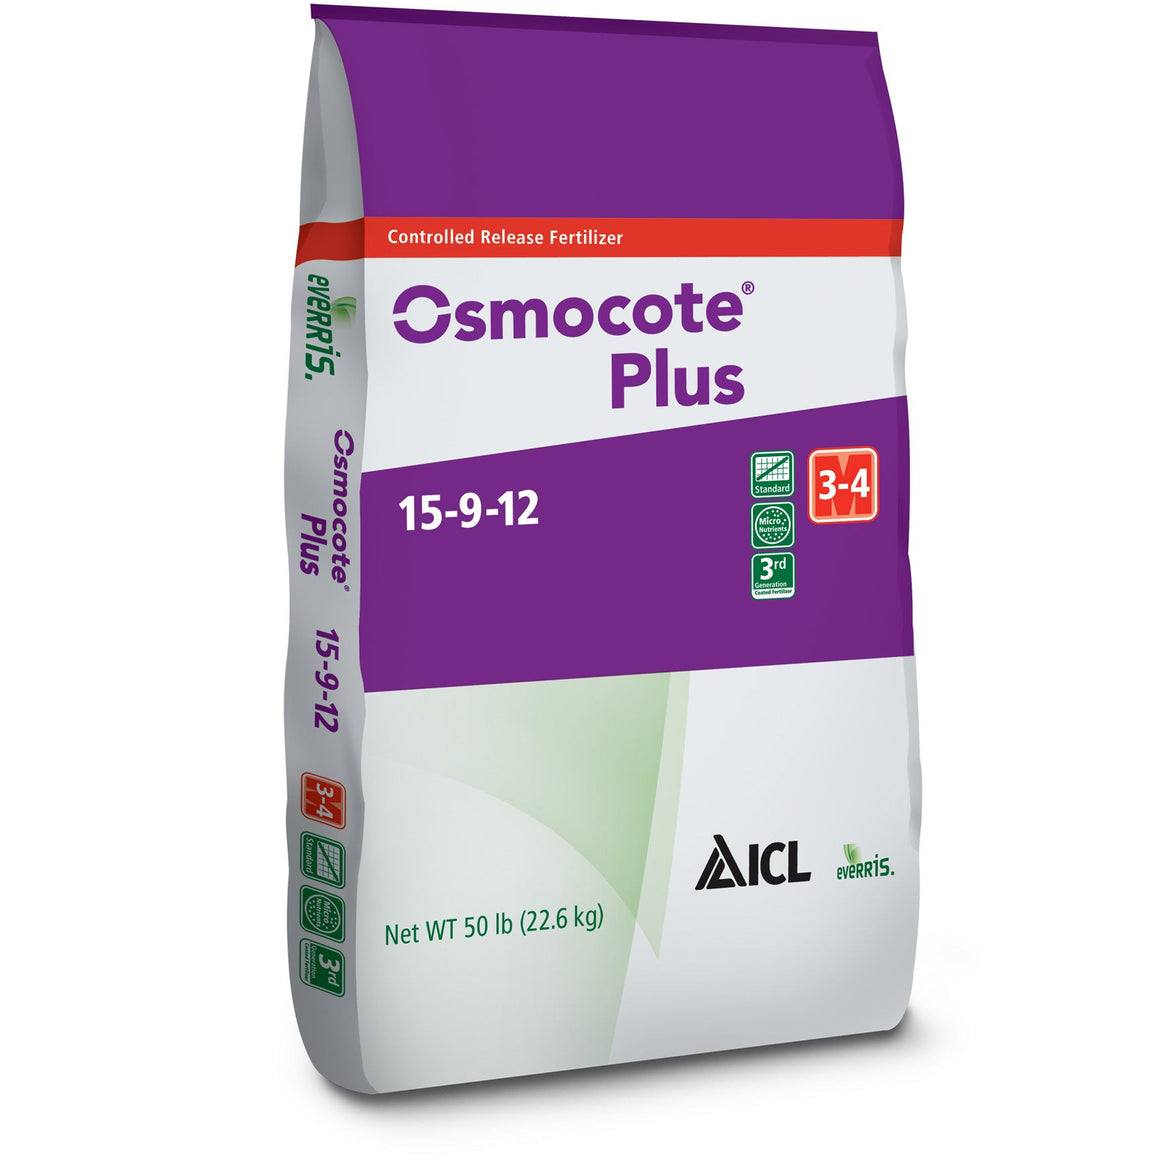 Osmocote Plus 15-9-12 Fertilizer - 50 Lbs. | 3-4 Month Controlled Release - Seed World